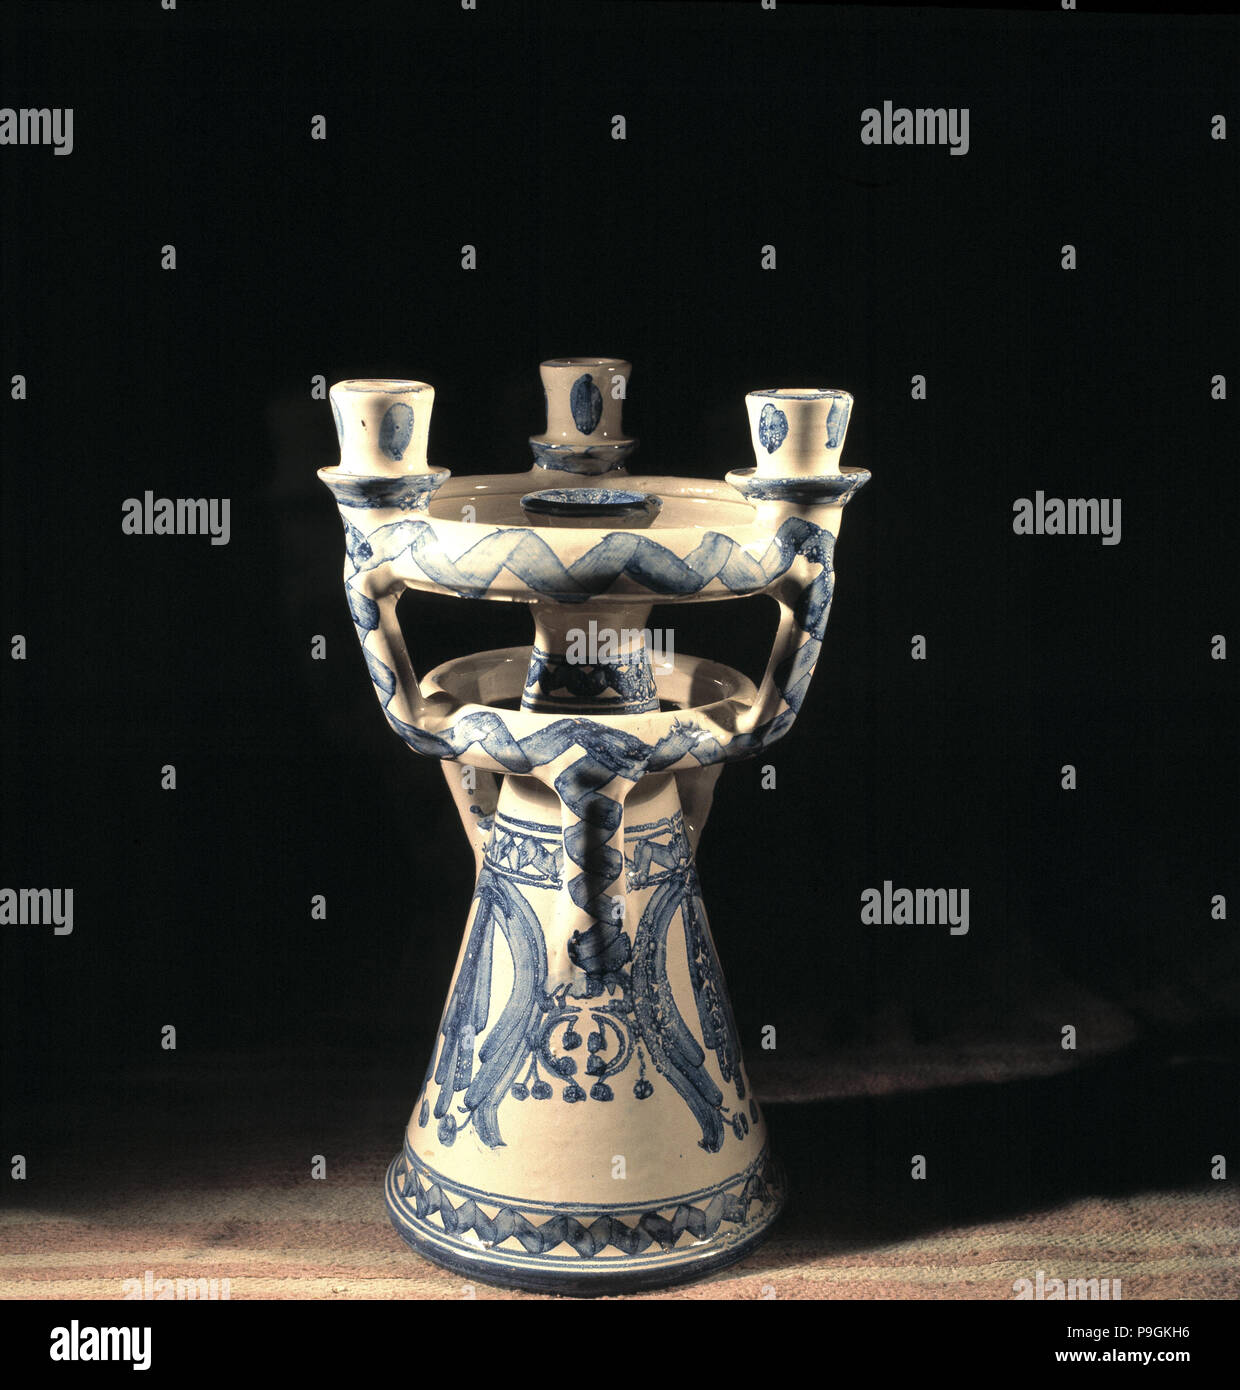 Muel ceramic candelabra, workshop of recovery of ancient potteries of the 15th and 16th centuries. Stock Photo